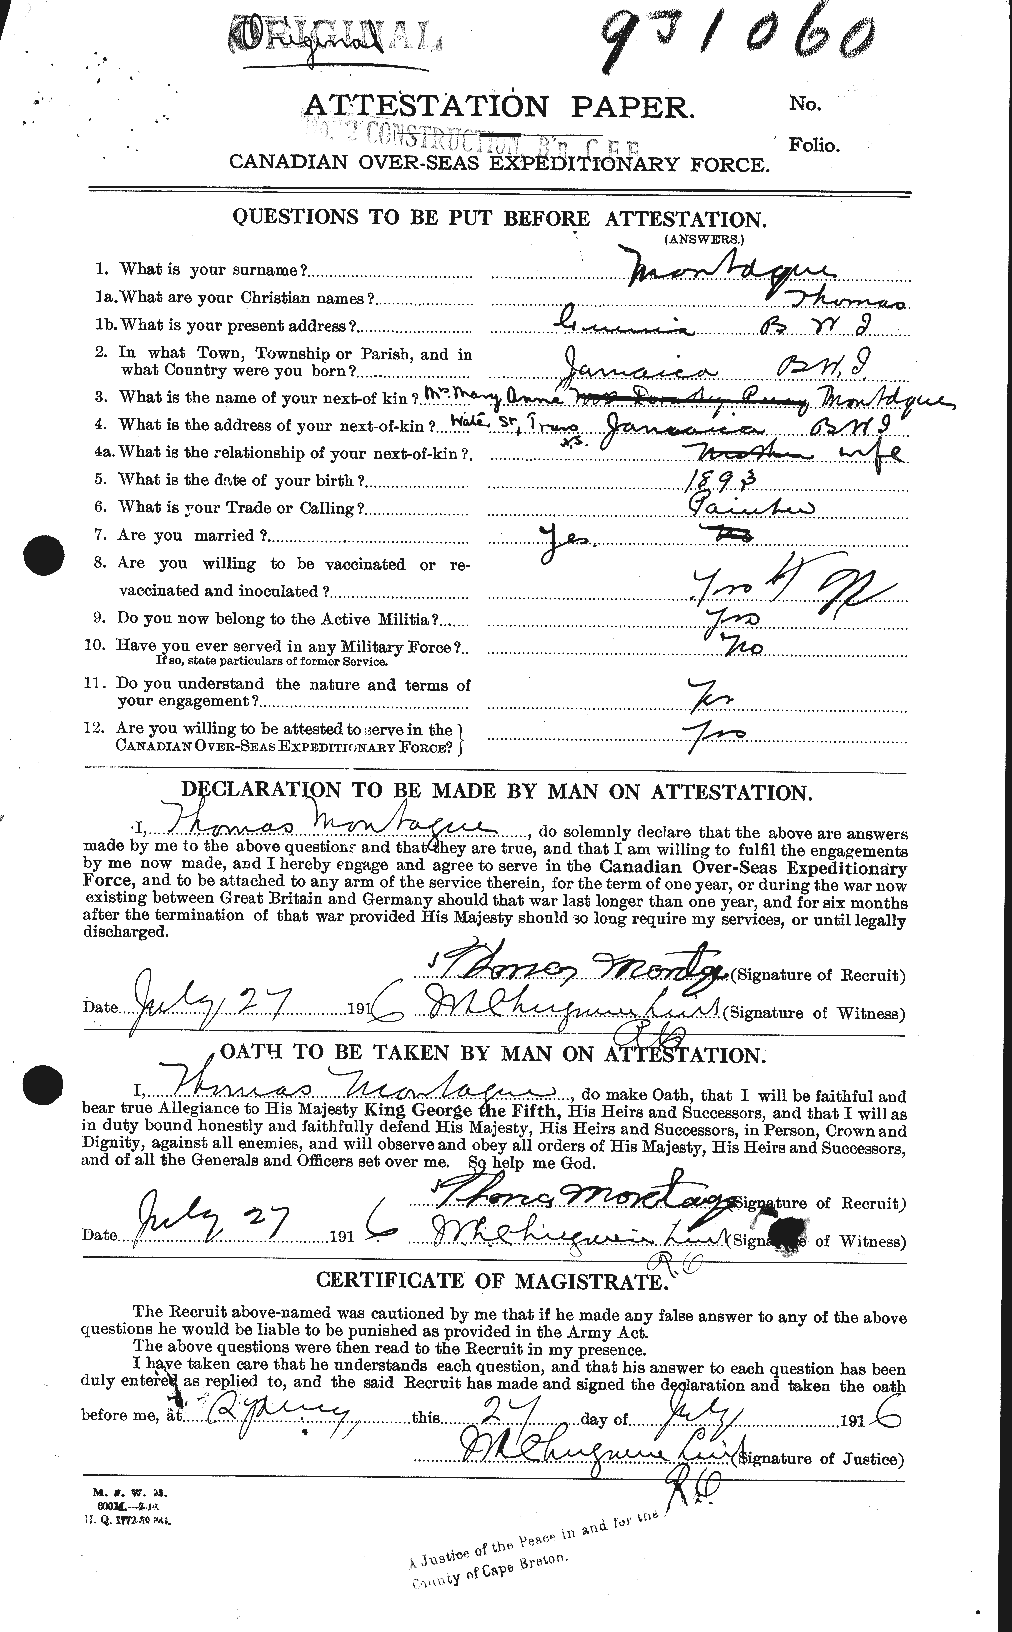 Personnel Records of the First World War - CEF 500190a